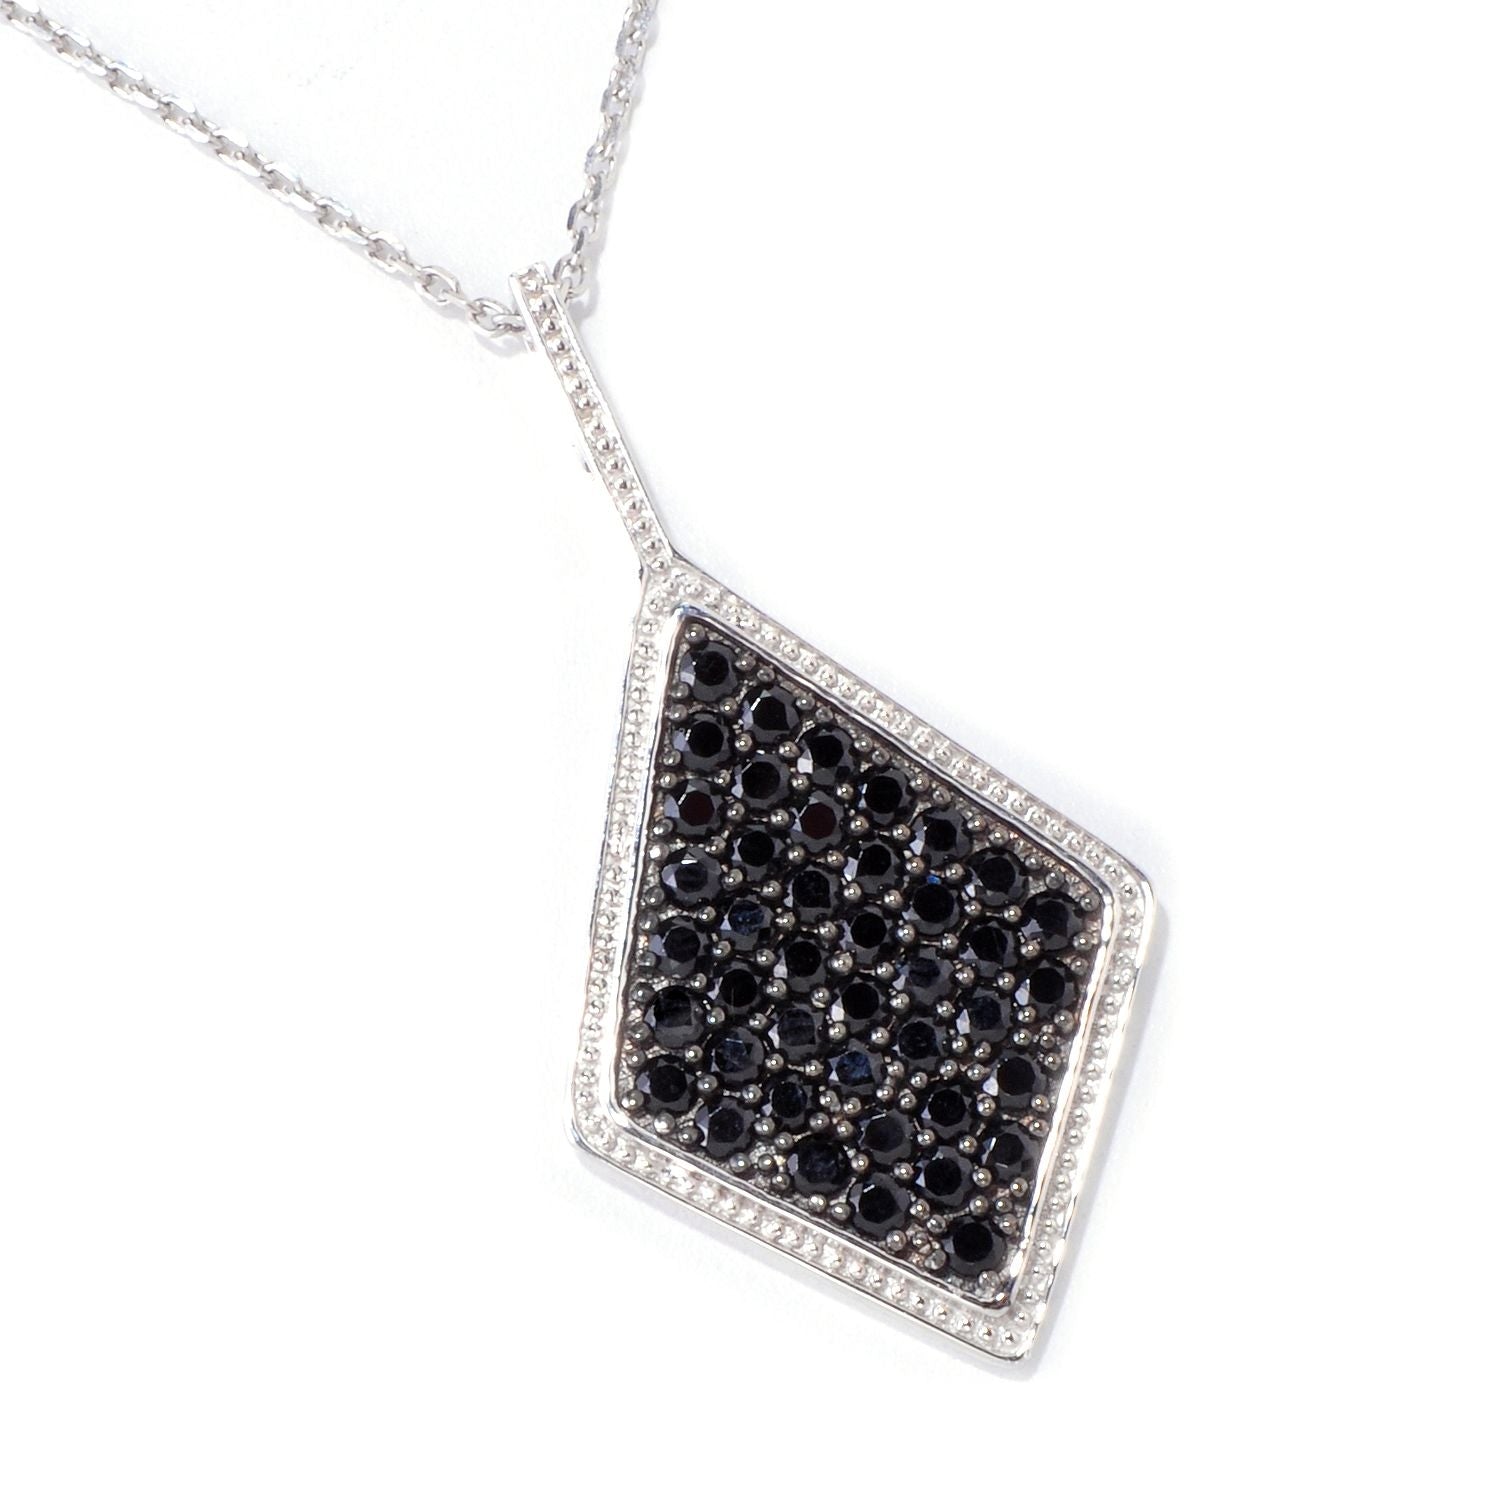 Pinctore Sterling Silver 3.4ctw Black Spinel Diamond Shaped 1.87'L Pendant with 18' Chain - pinctore